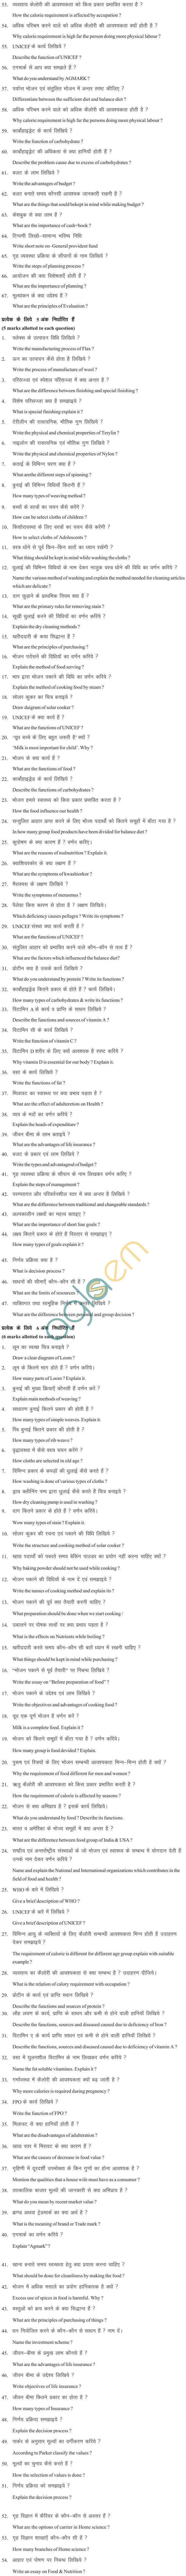 MP Board Class XI Question Bank - Home Management & Nutrition